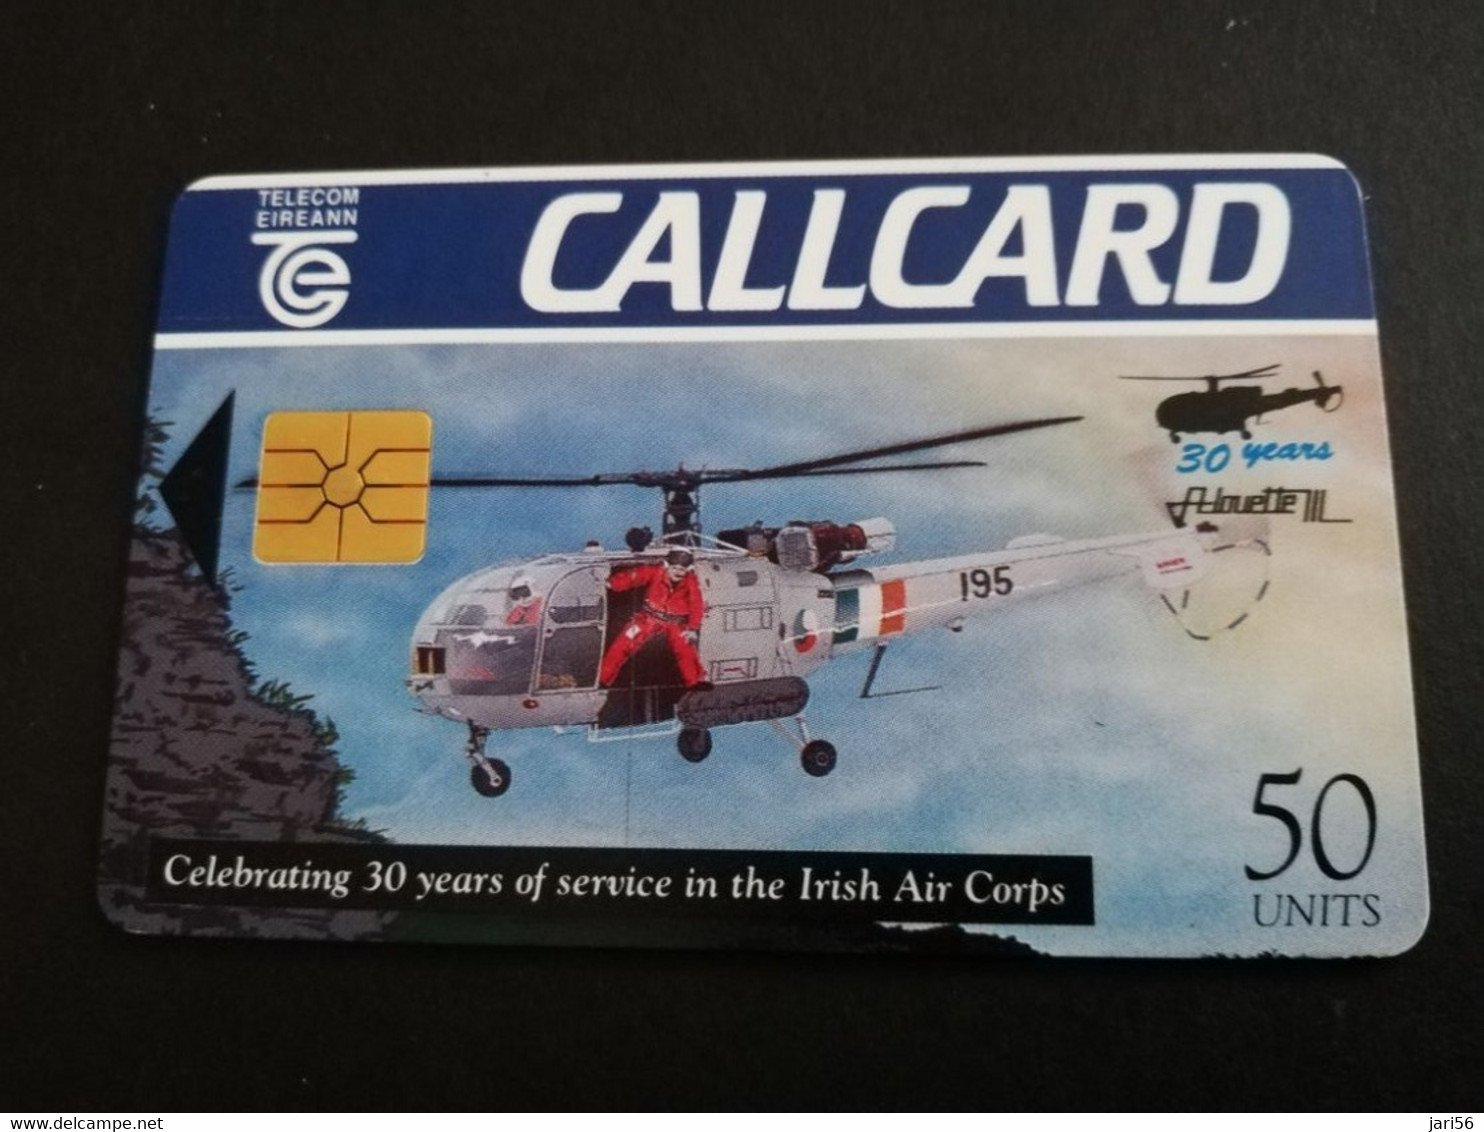 IRELAND /IERLANDE   CHIPCARD  50  UNITS  CELEBRATING IRISH AIR CORPS  HELICOPTER/ALOUETTE            CHIP   ** 5265** - Irland